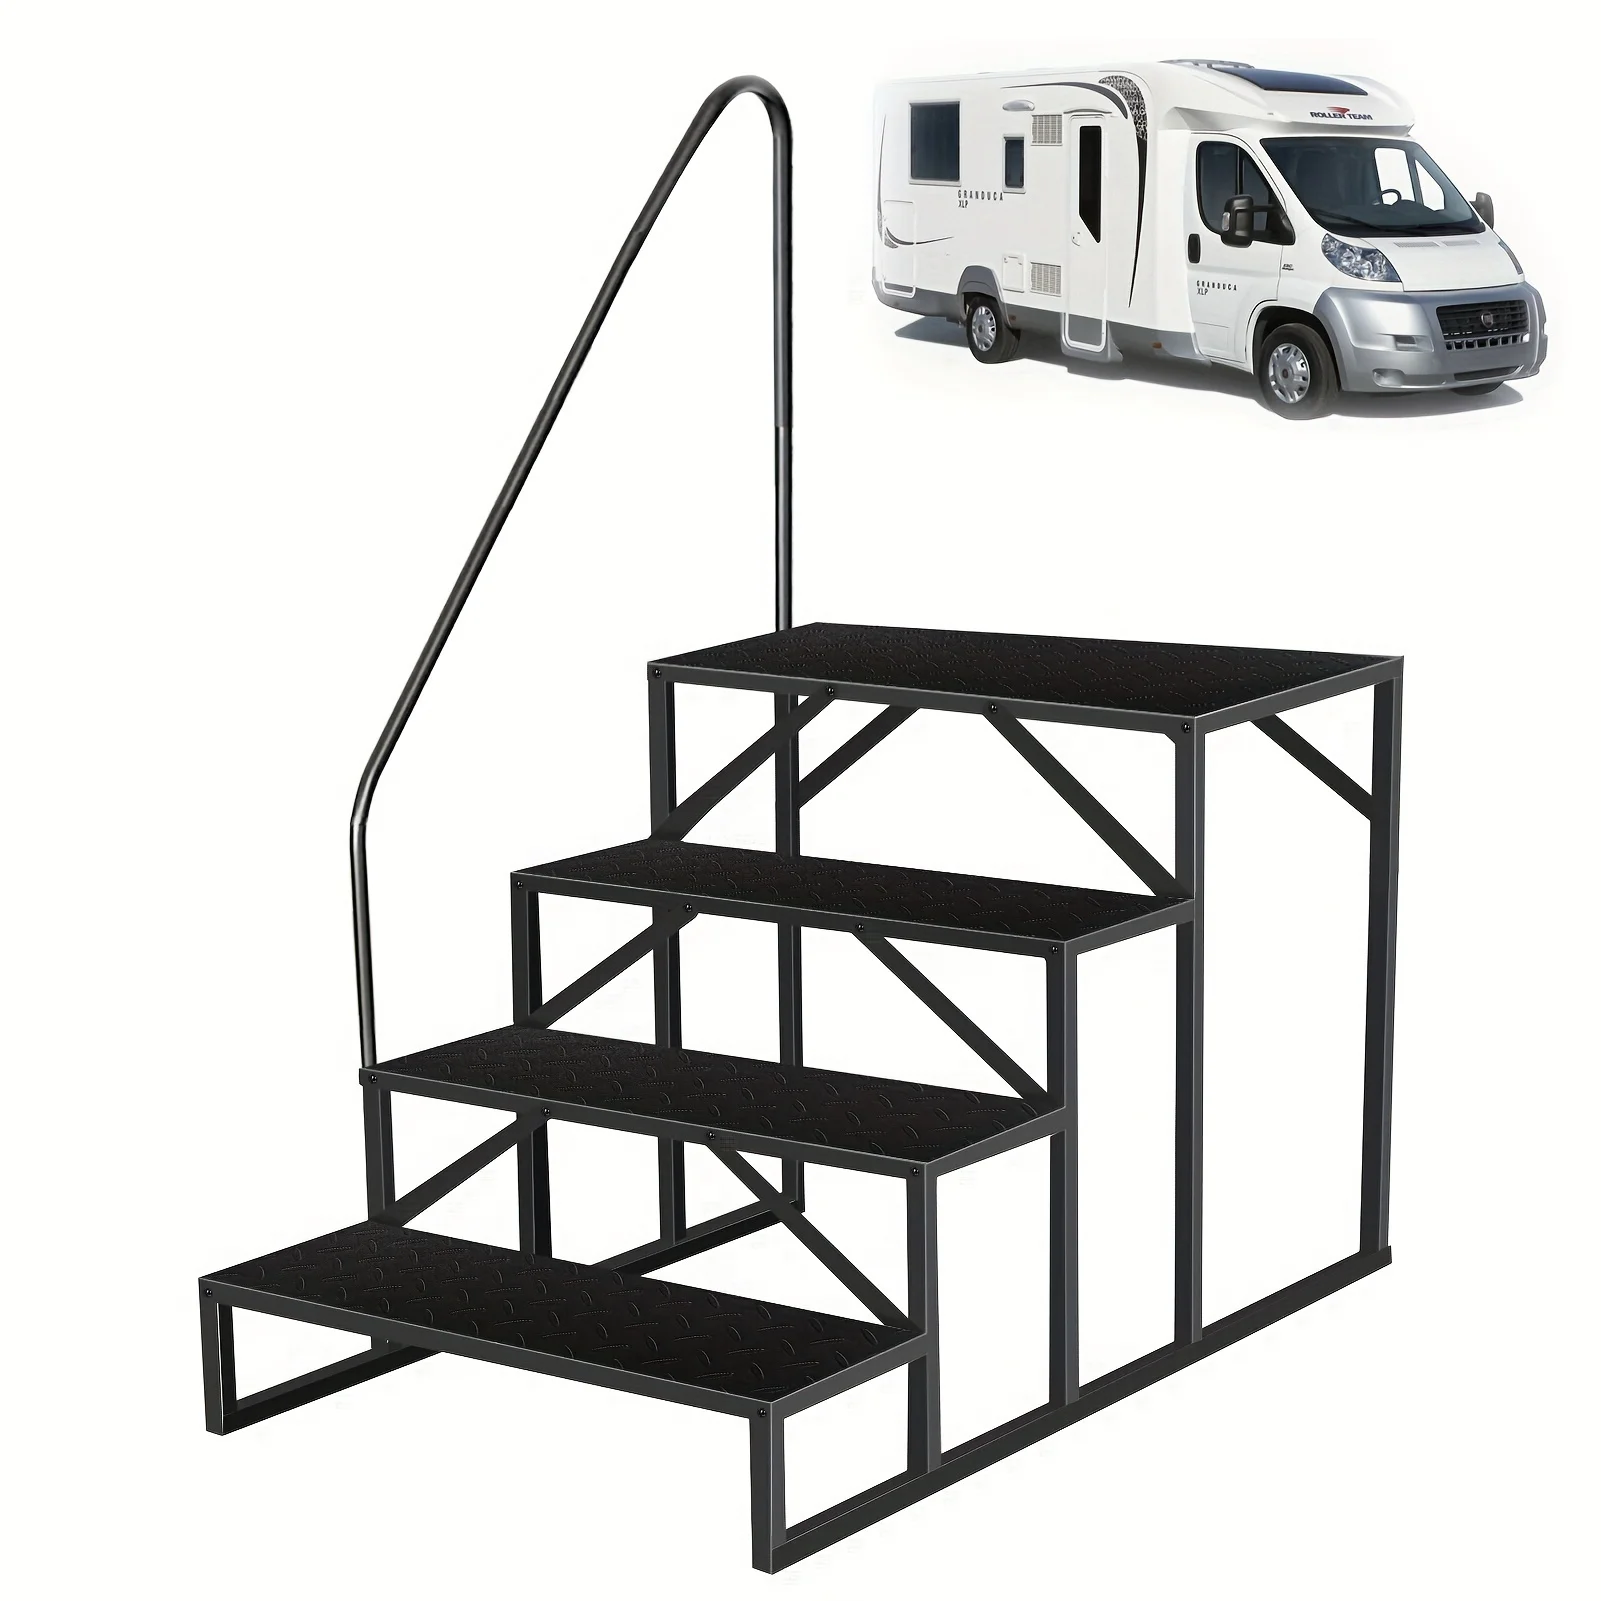 

RV Steps with Handrail,4 Step RV Stairs with Handrail,Update 3.0 Outdoor RV Ladders with Anti-Slip Pedals,Mobile Home Stairs for